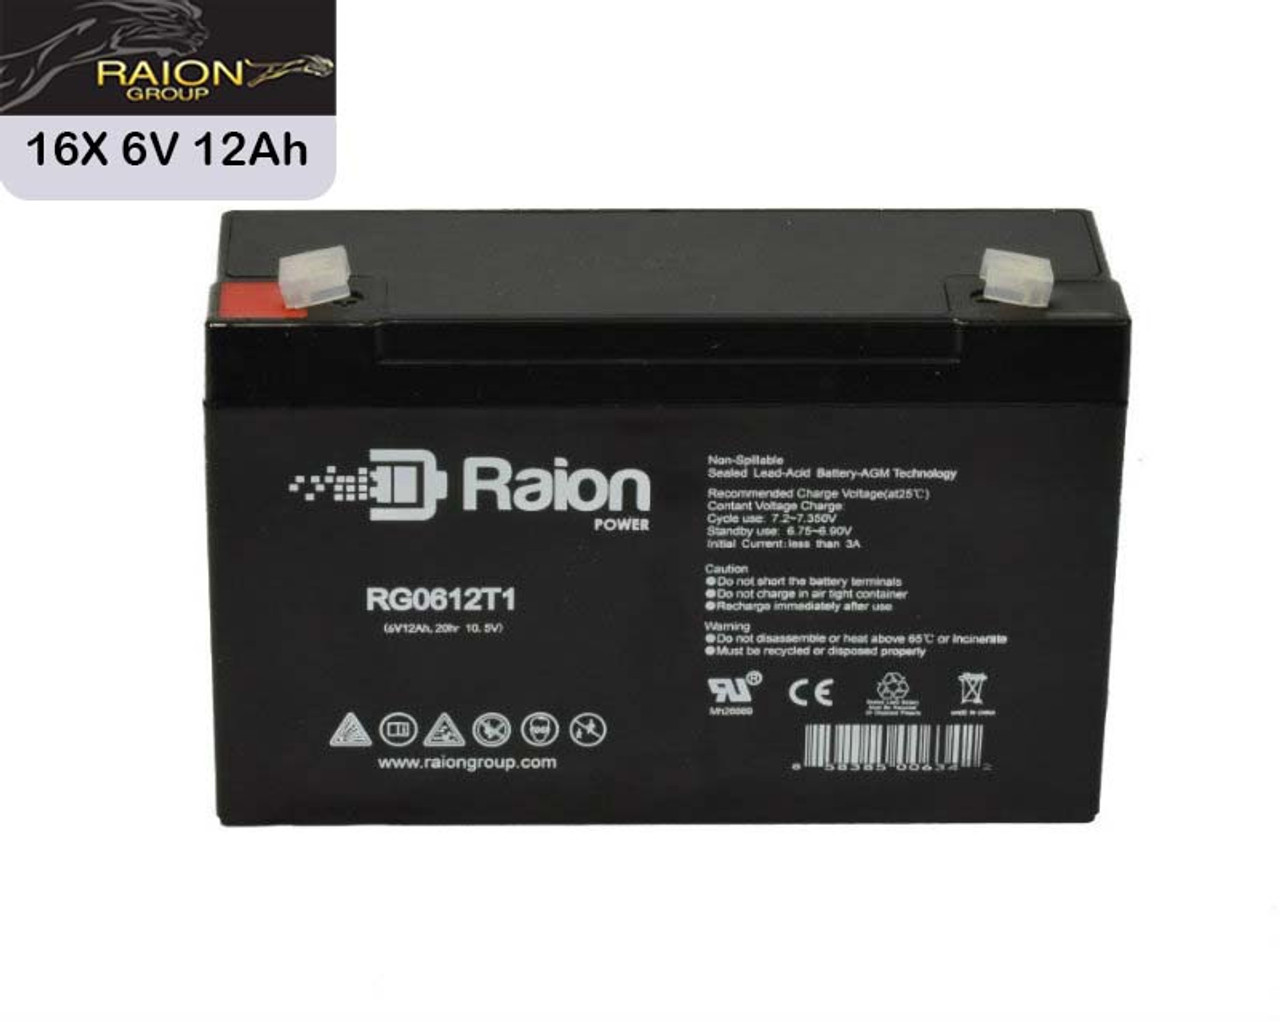 HP Compaq 242706-001 Replacement 6V 12Ah RG0612T1 UPS Battery - 16 Pack